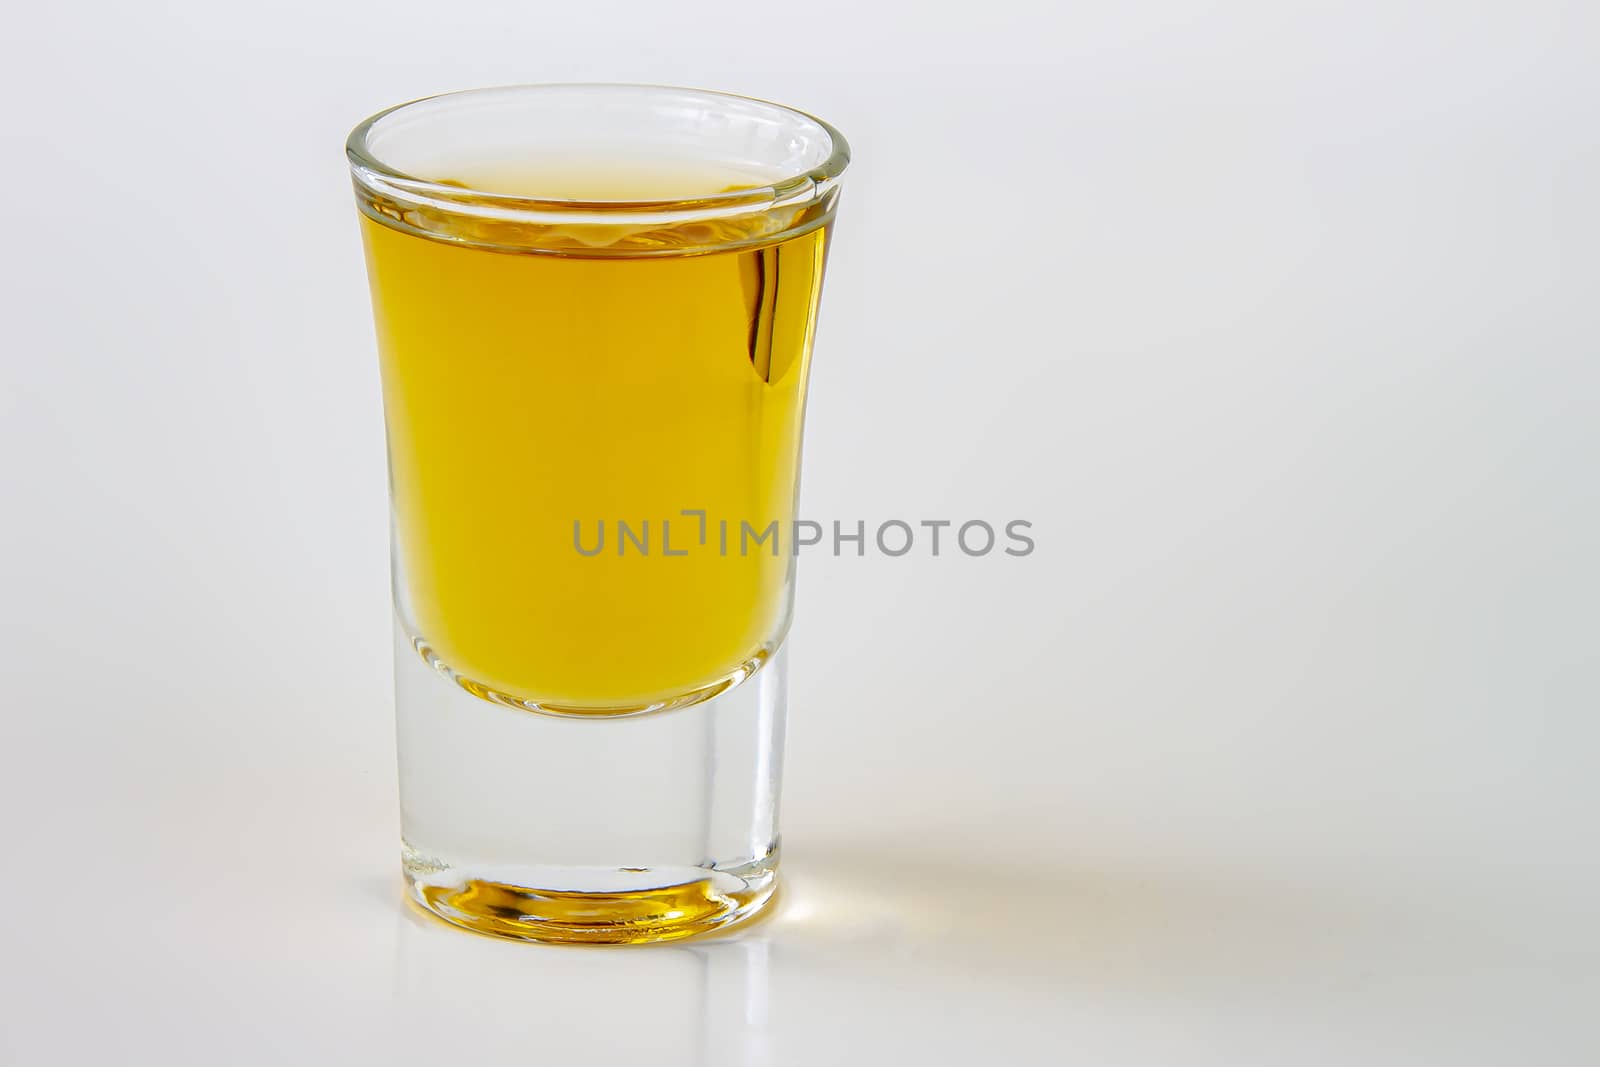 A horizontal view of a liquor shot drink on a white background by oasisamuel